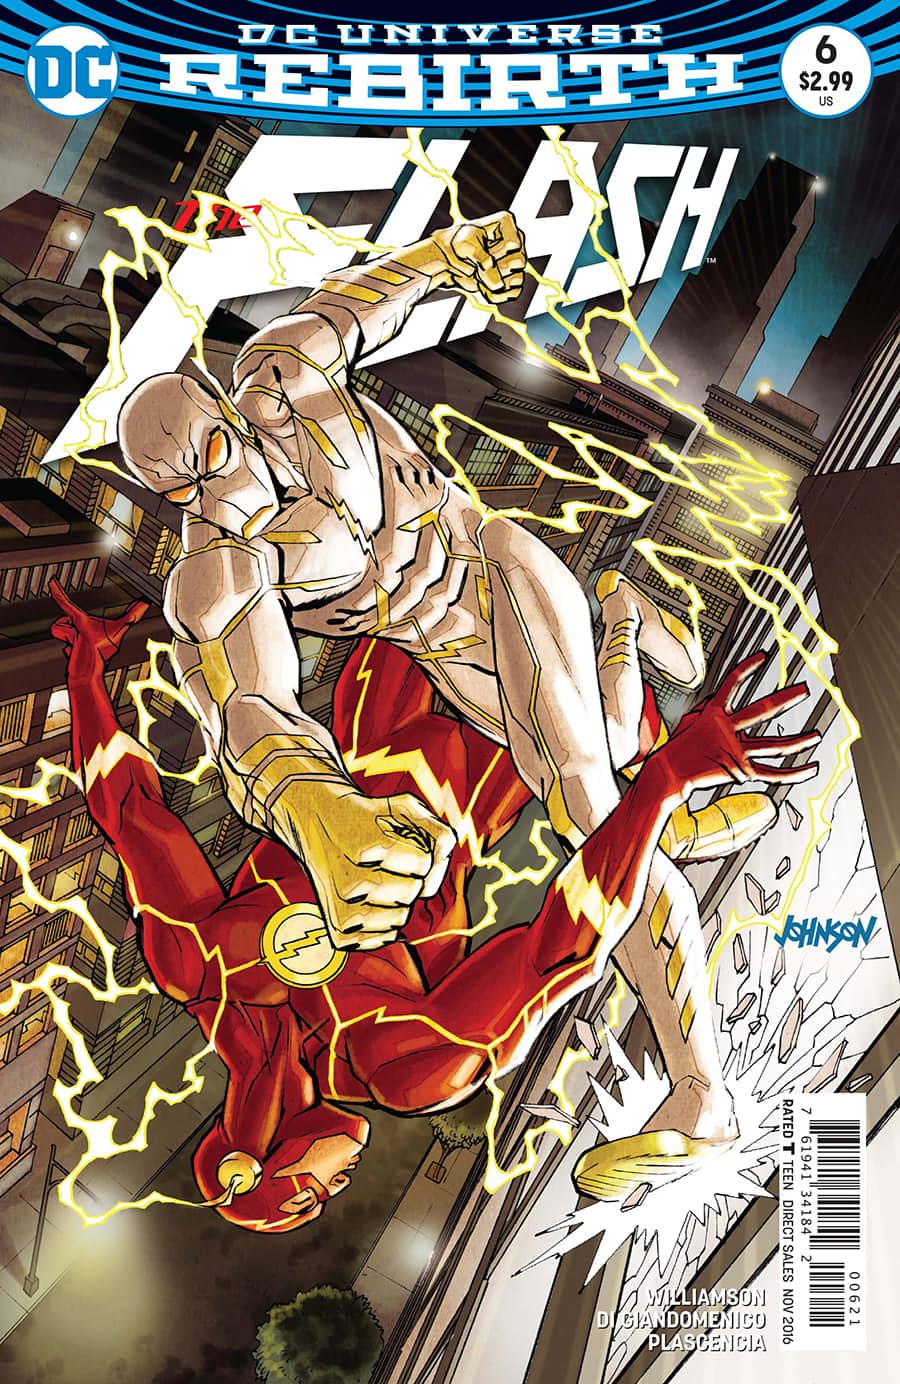 The Flash #6 Review